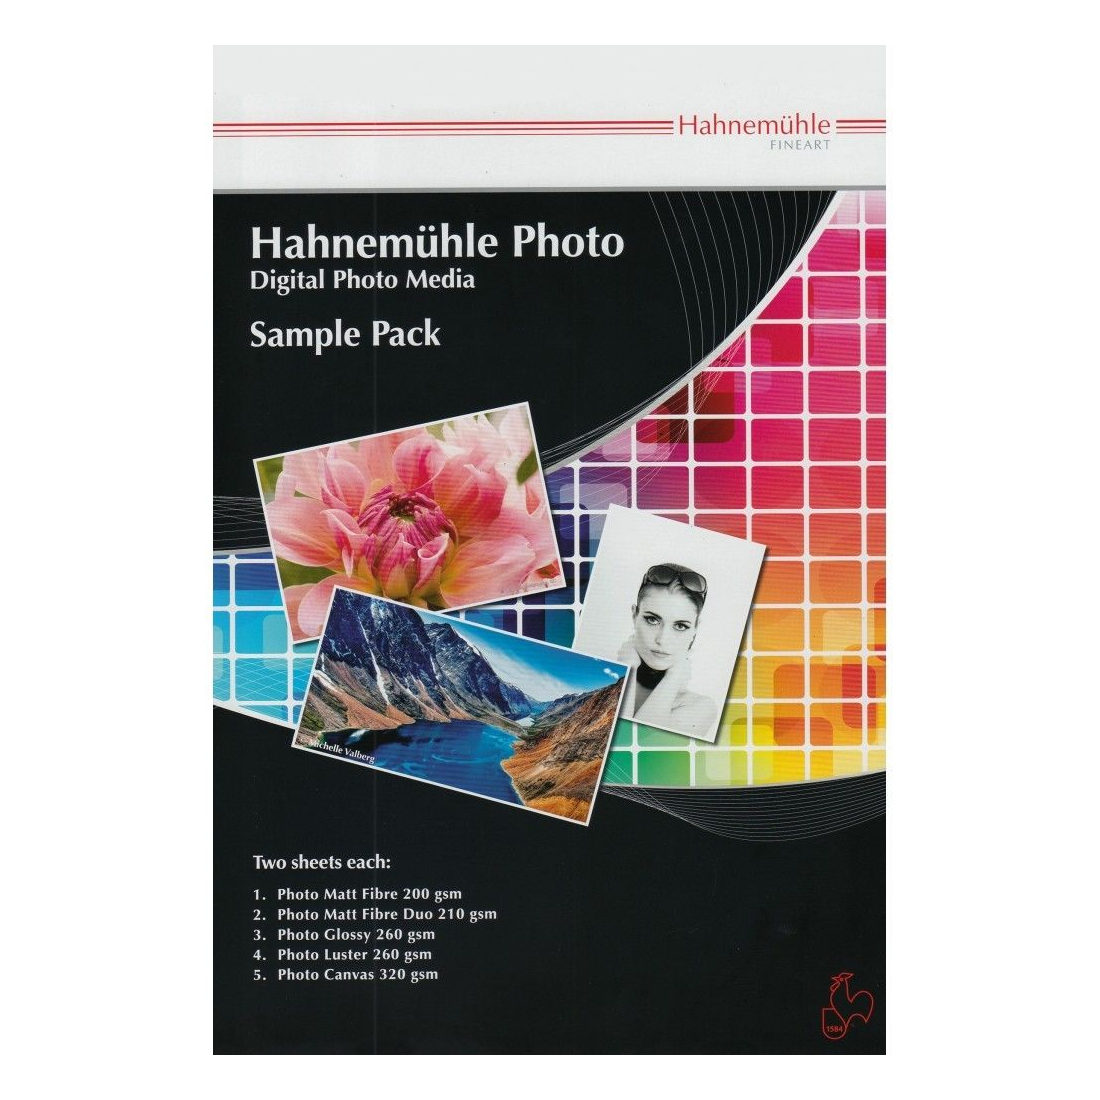 Image of Hahnemühle Photo Sample Pack